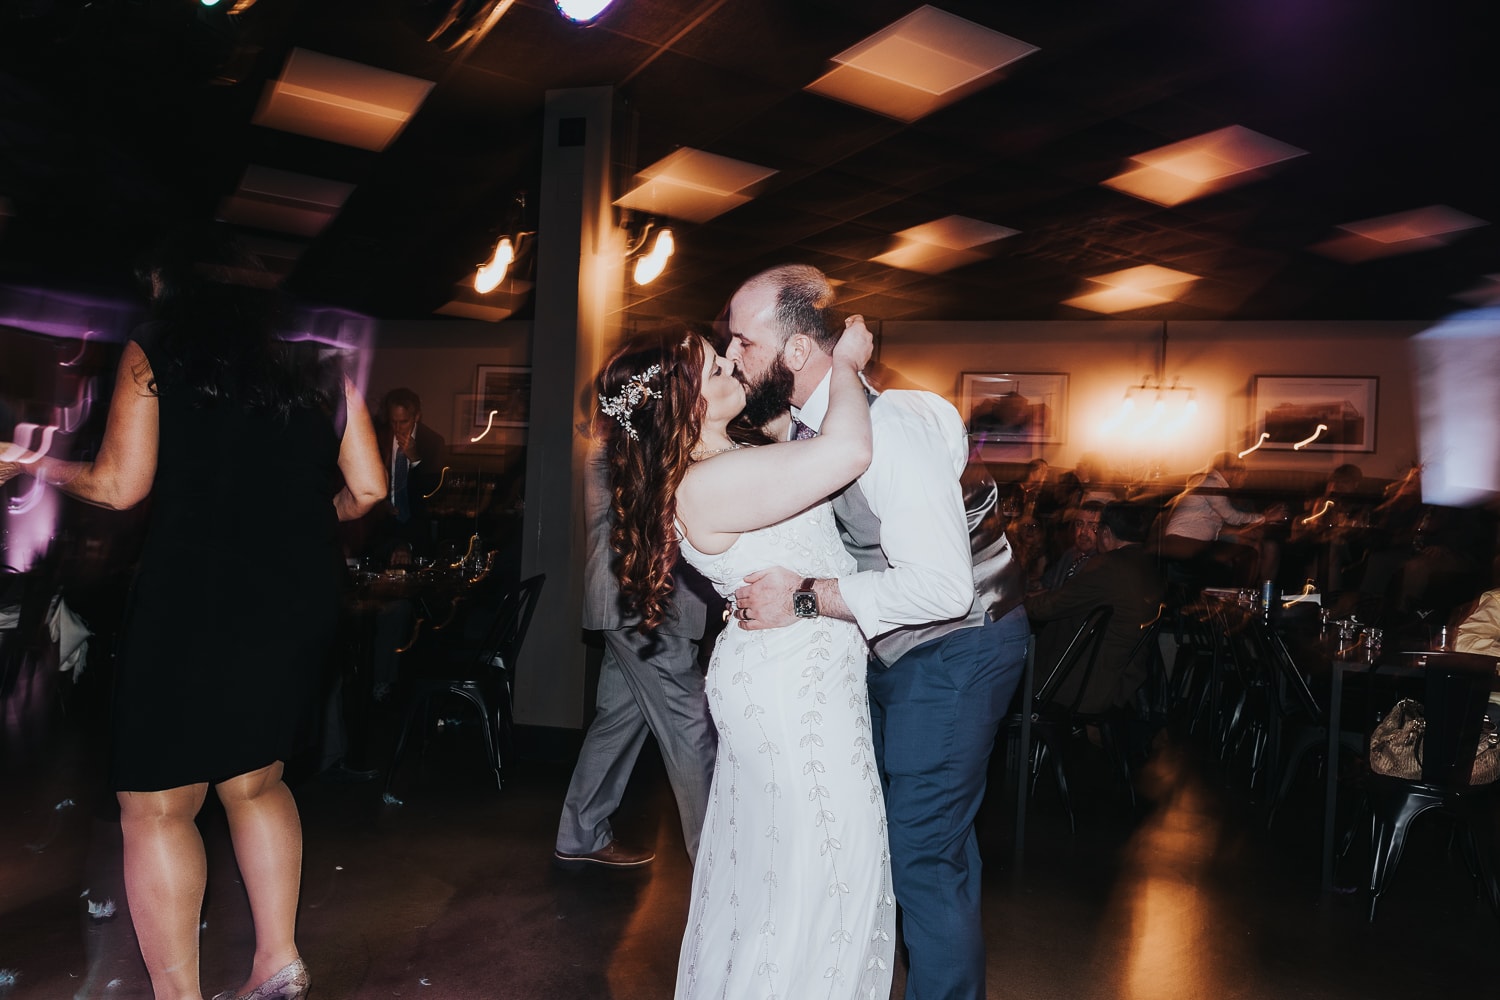 Wedding Photographer, Bride and groom kiss as they dance at their reception